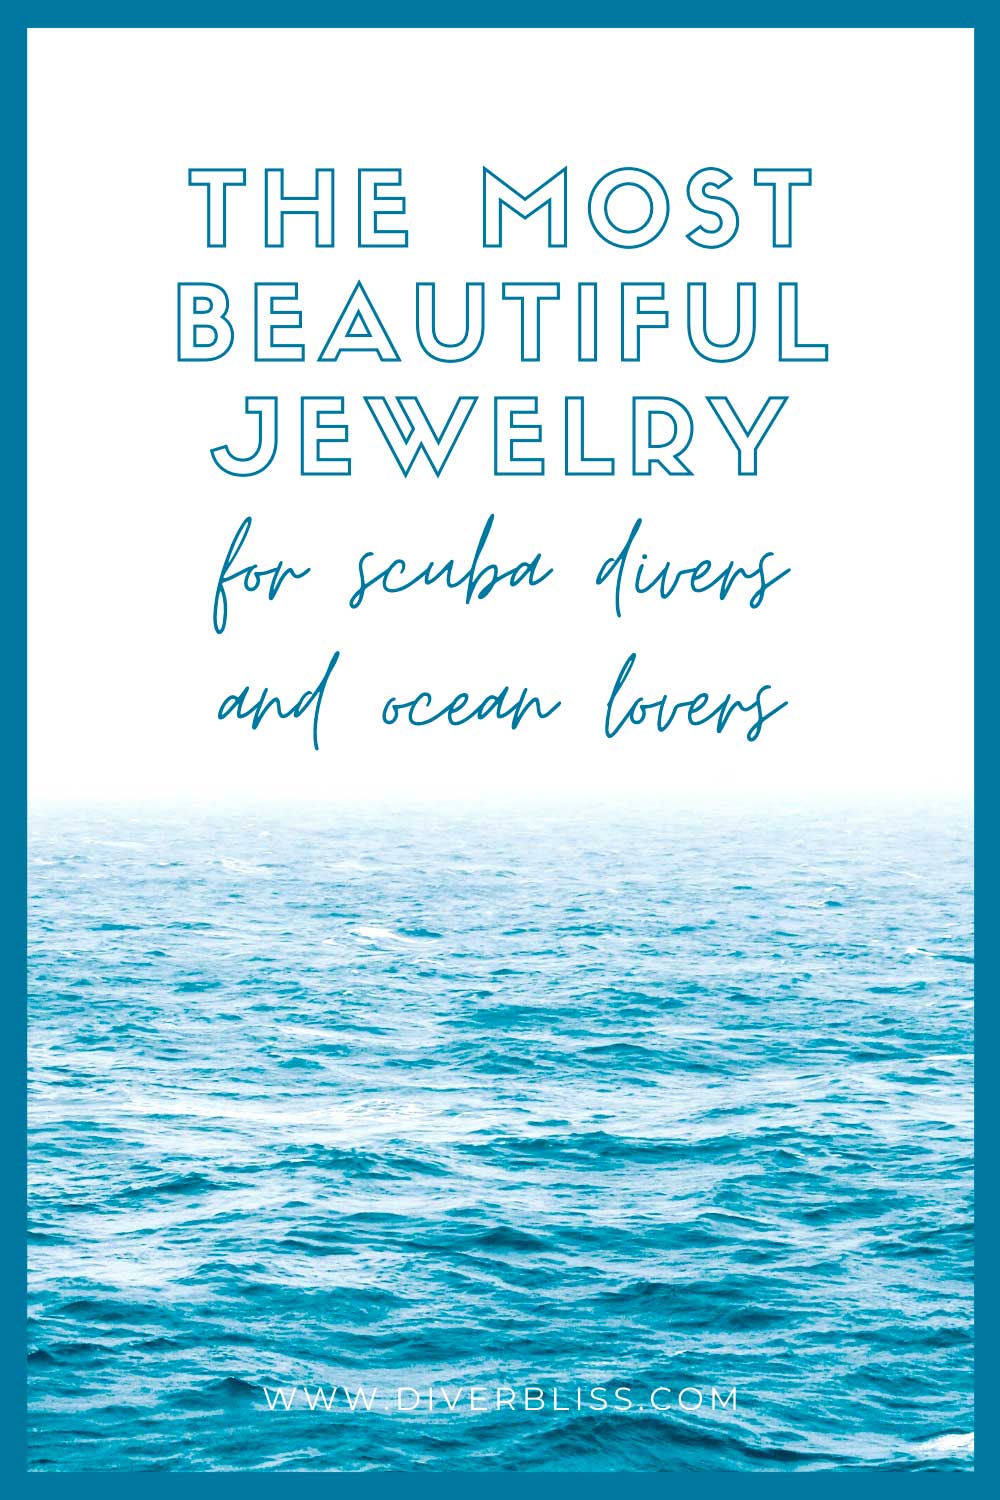 The most beautiful jewelry for scuba divers and ocean lovers